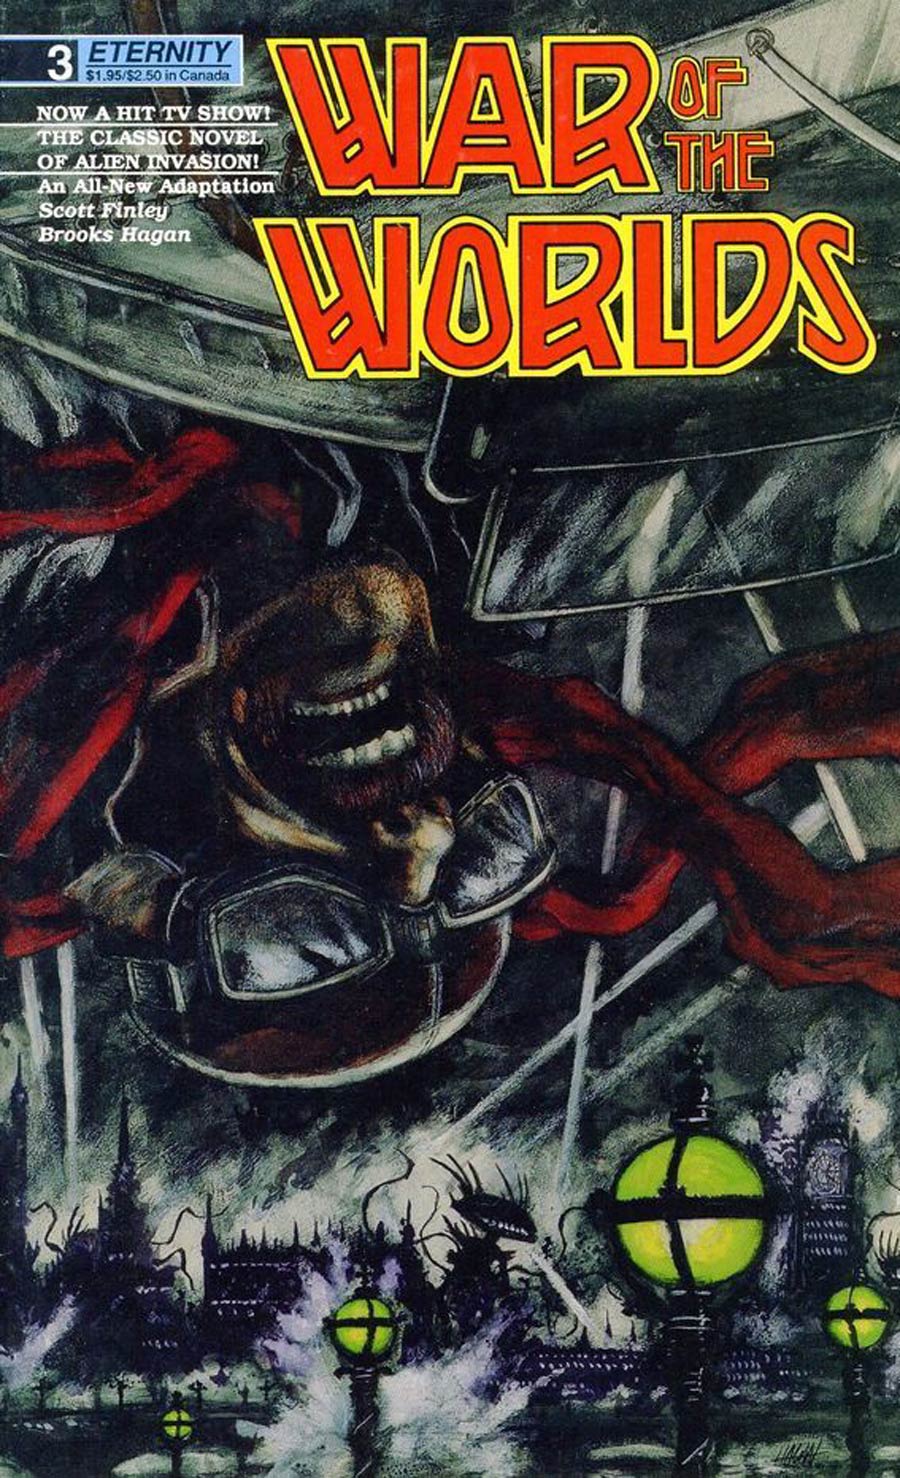 War Of The Worlds (Eternity) #3